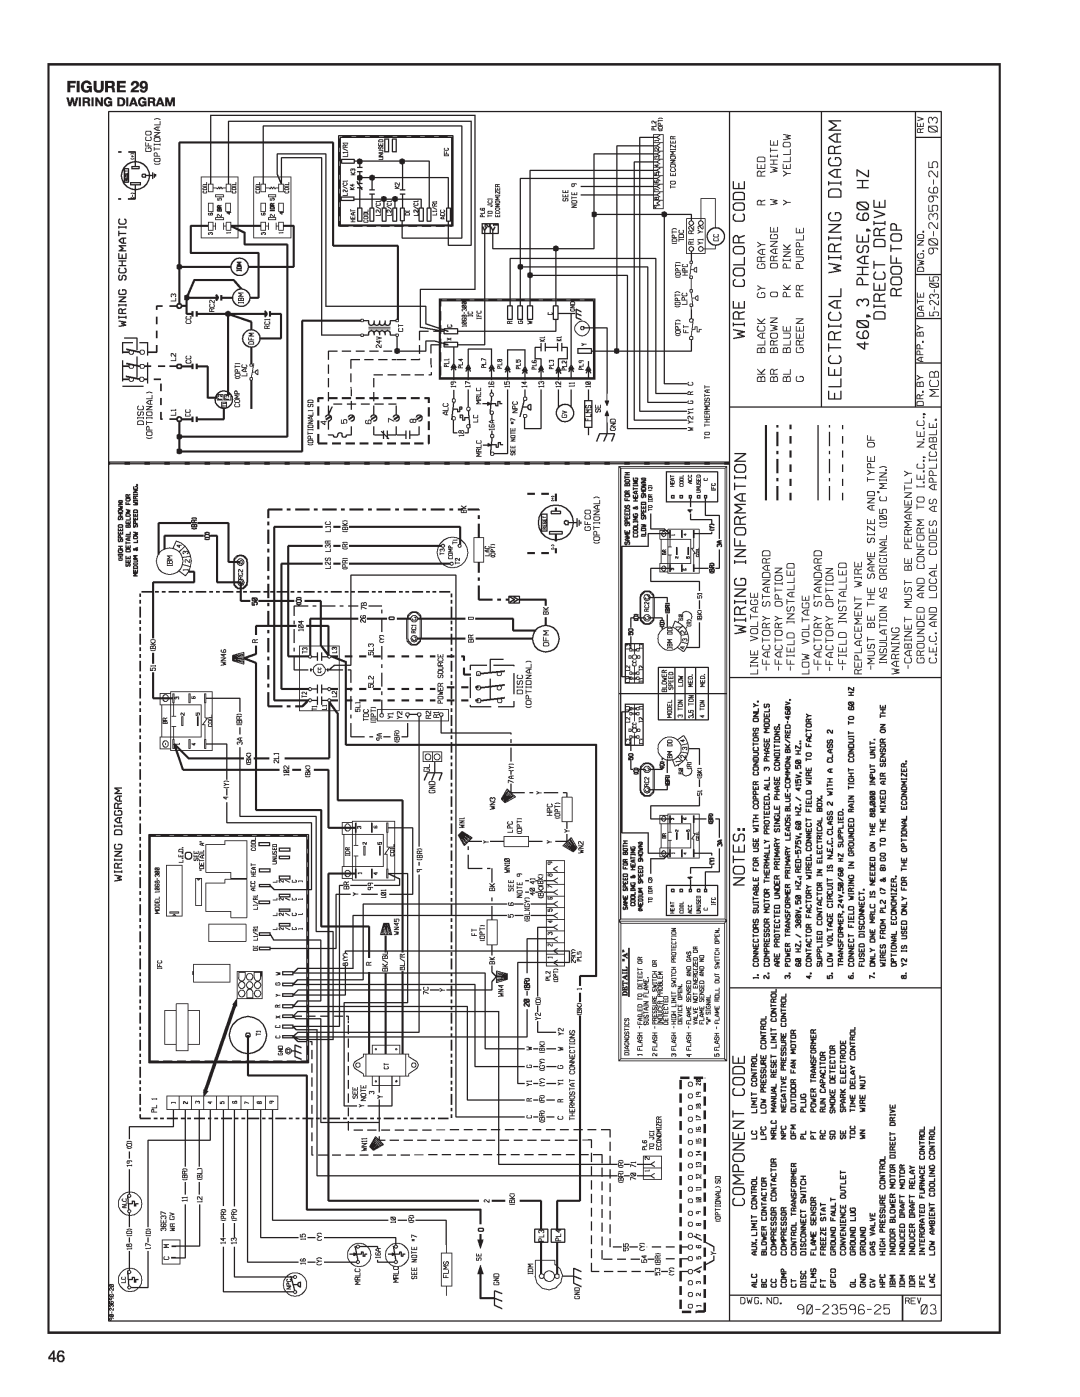 Heat Controller A-13 installation instructions Wiring Diagram 